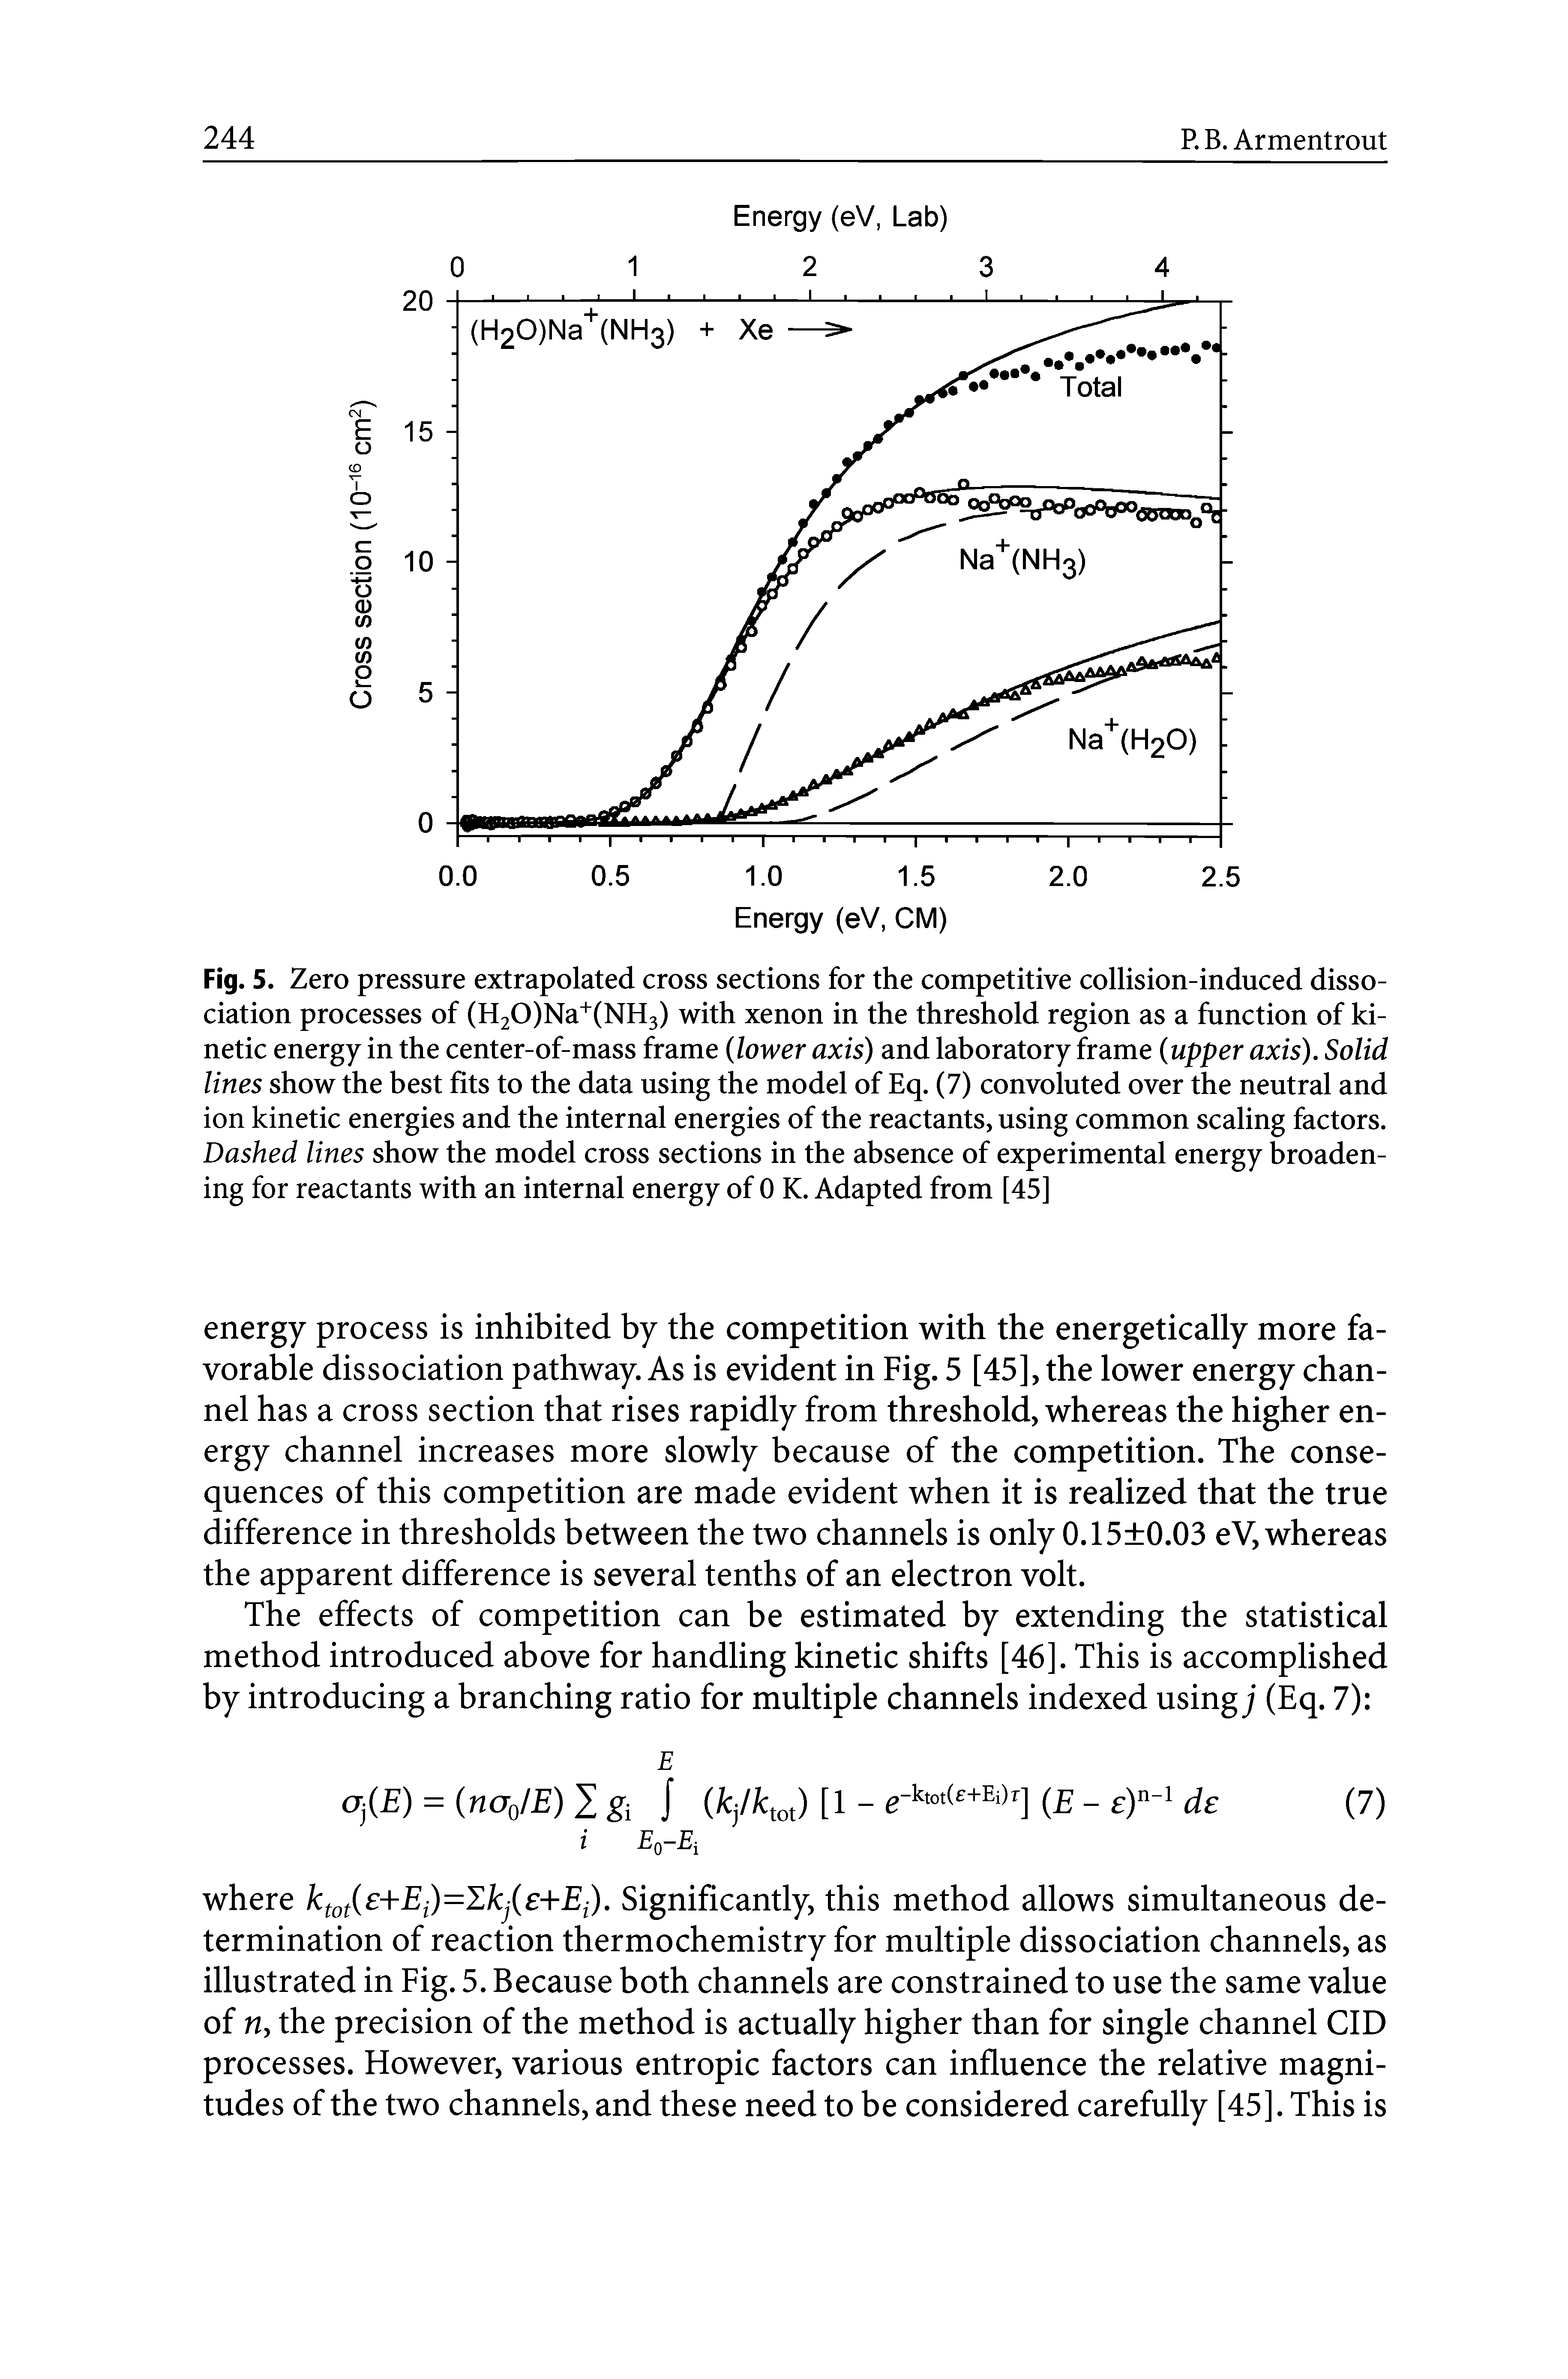 Fig. 5. Zero pressure extrapolated cross sections for the competitive collision-induced dissociation processes of (H20)Na+(NH3) with xenon in the threshold region as a function of kinetic energy in the center-of-mass frame (lower axis) and laboratory frame (upper axis). Solid lines show the best fits to the data using the model of Eq. (7) convoluted over the neutral and ion kinetic energies and the internal energies of the reactants, using common scaling factors. Dashed lines show the model cross sections in the absence of experimental energy broadening for reactants with an internal energy of 0 K. Adapted from [45]...